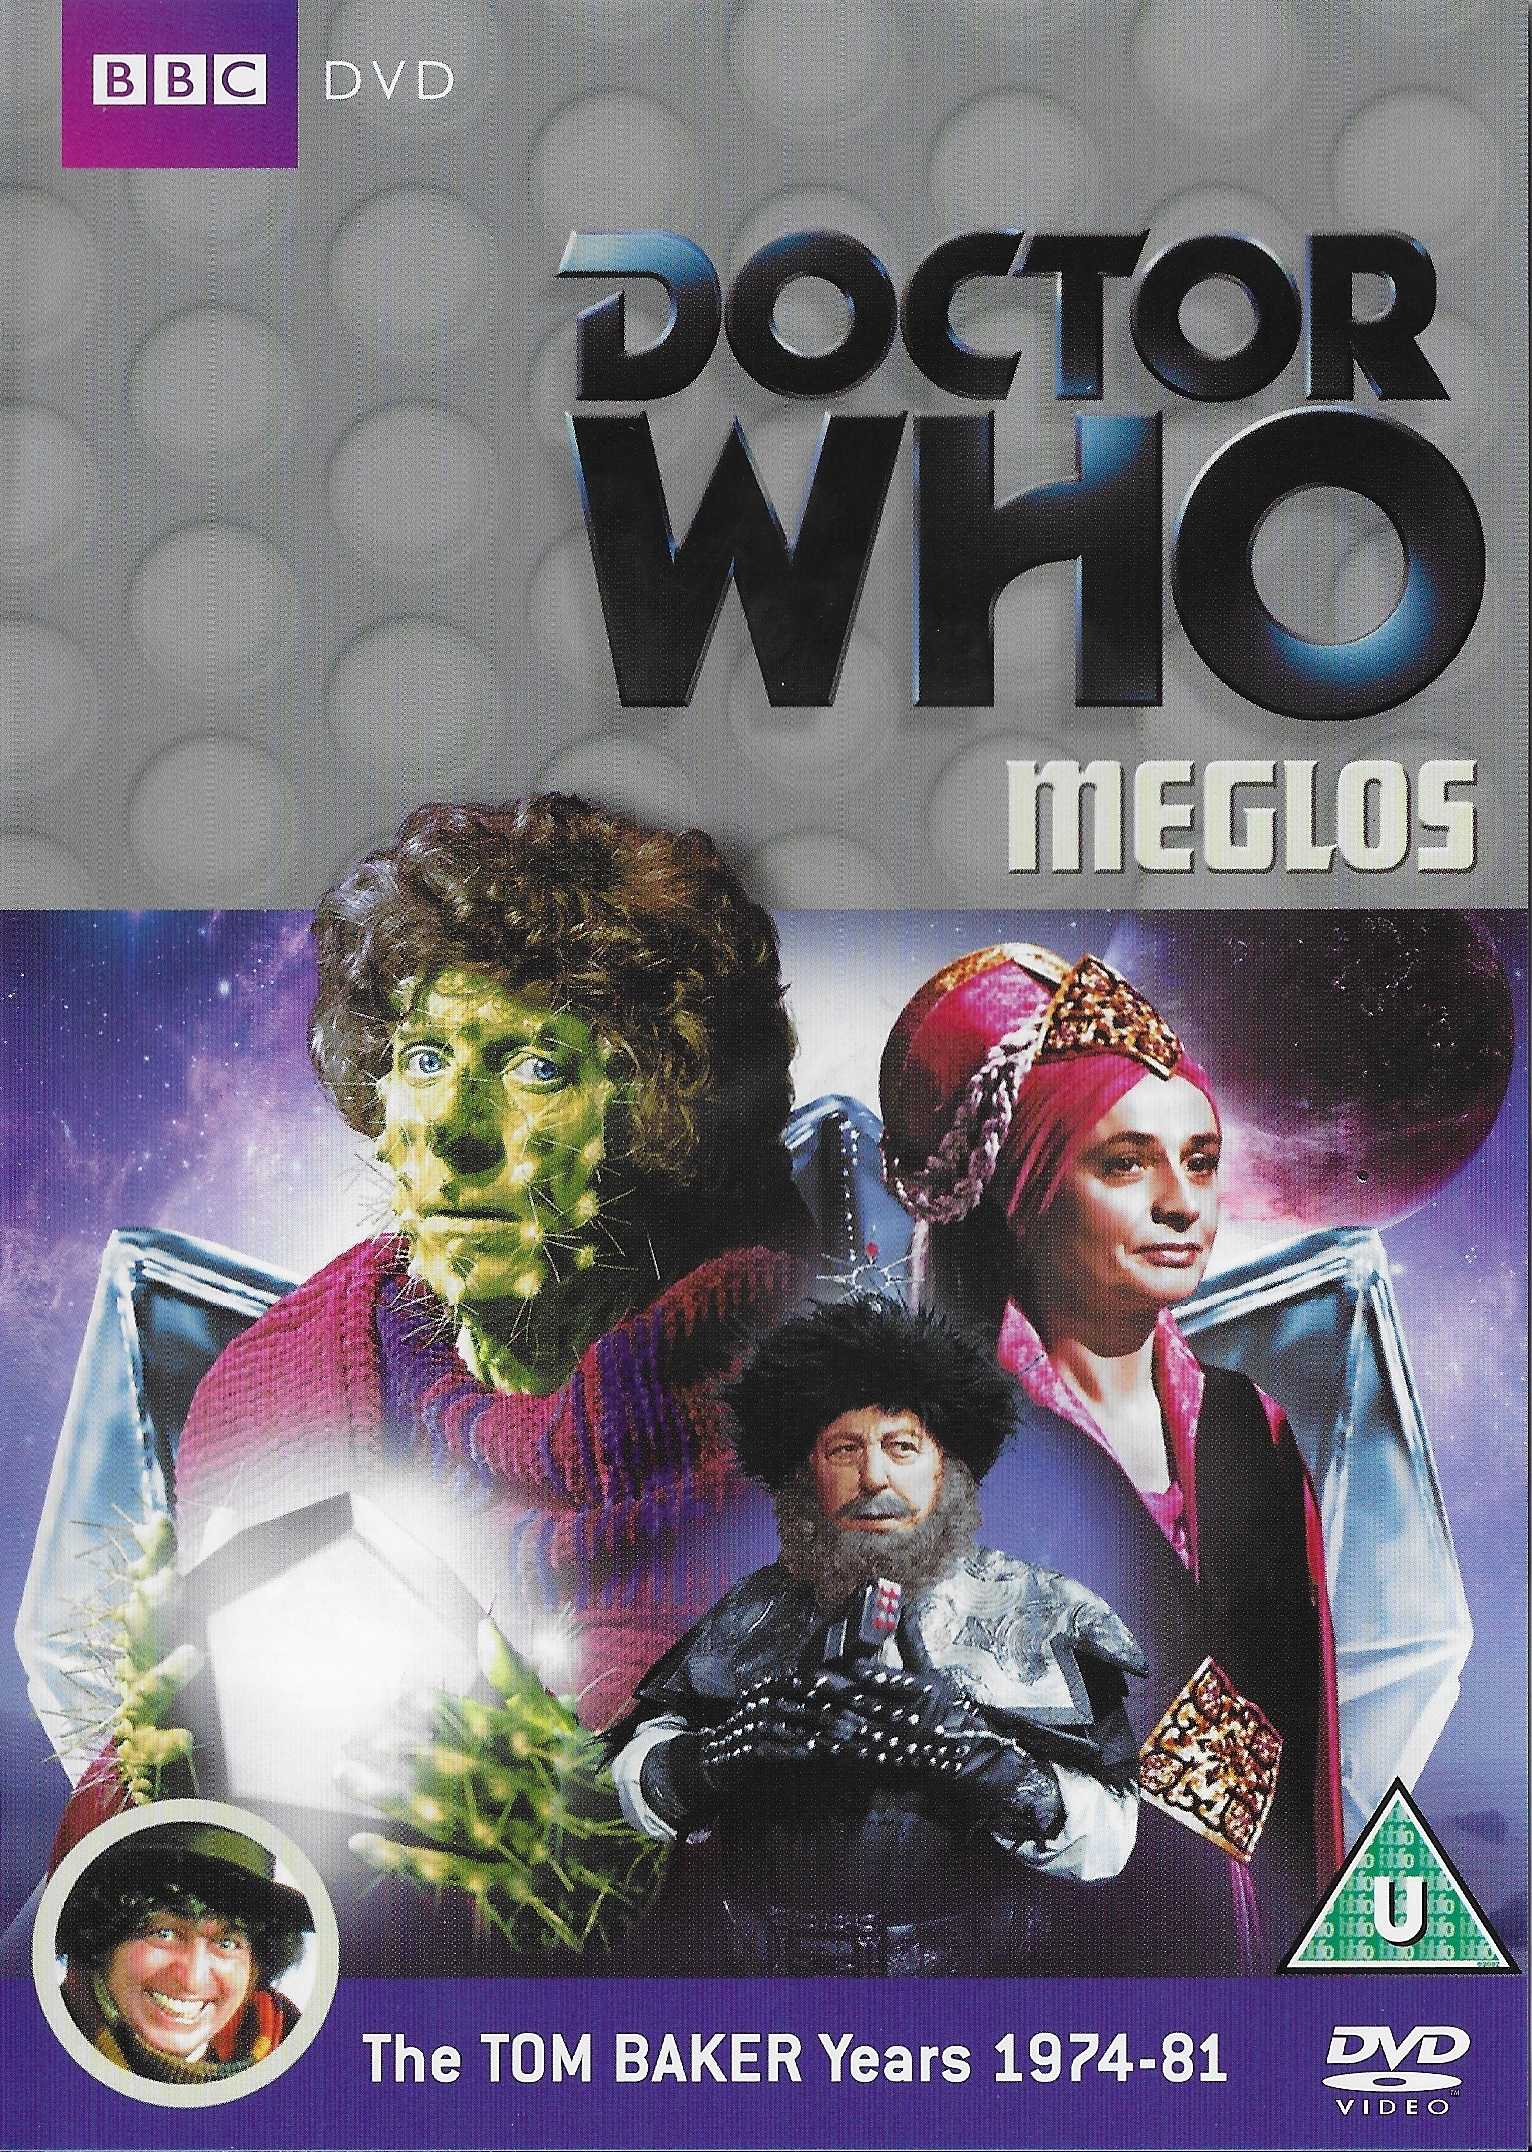 Picture of BBCDVD 2852 Doctor Who - Meglos by artist John Flanagan / Andrew McCulloch from the BBC records and Tapes library